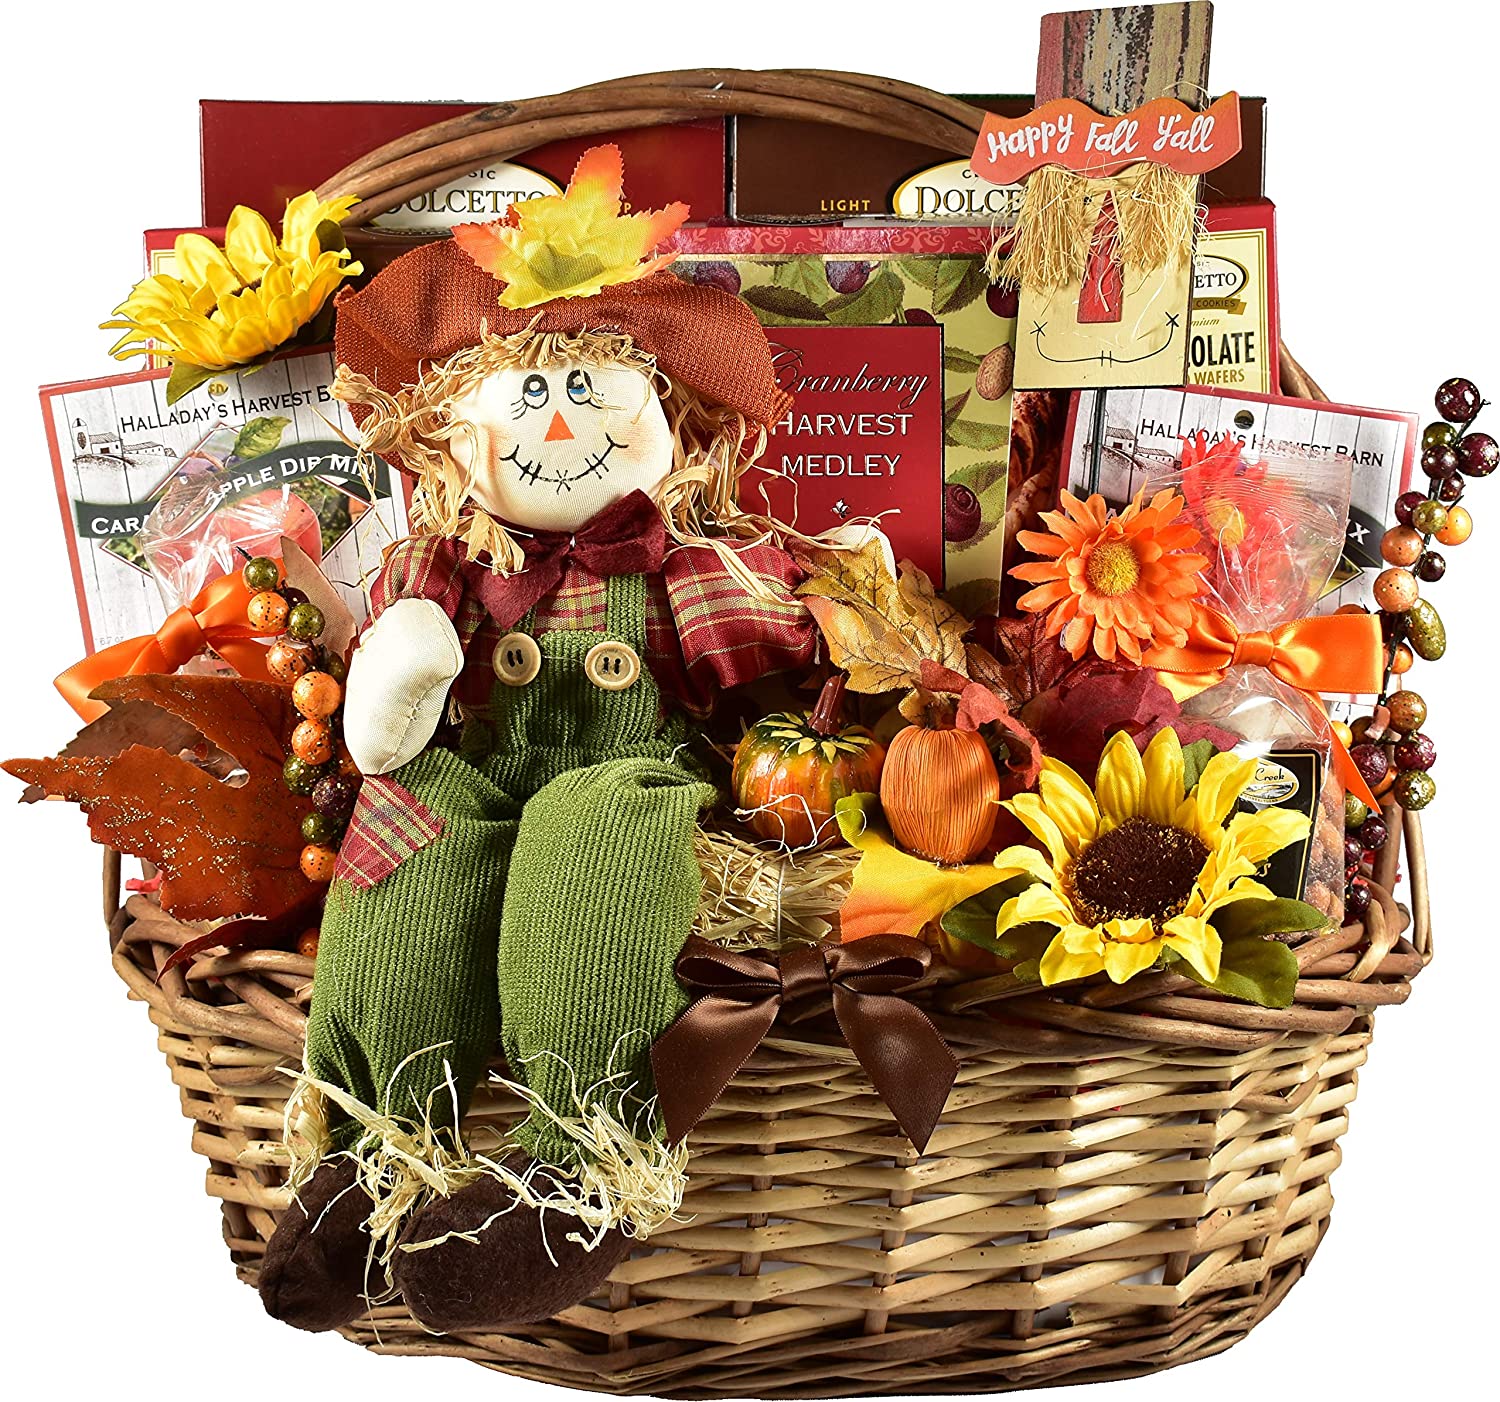 Gift Basket Village Its Fall, Yall, Large Fall Gift Basket With Scarecrow & Gourmet Seasonal Snack Items